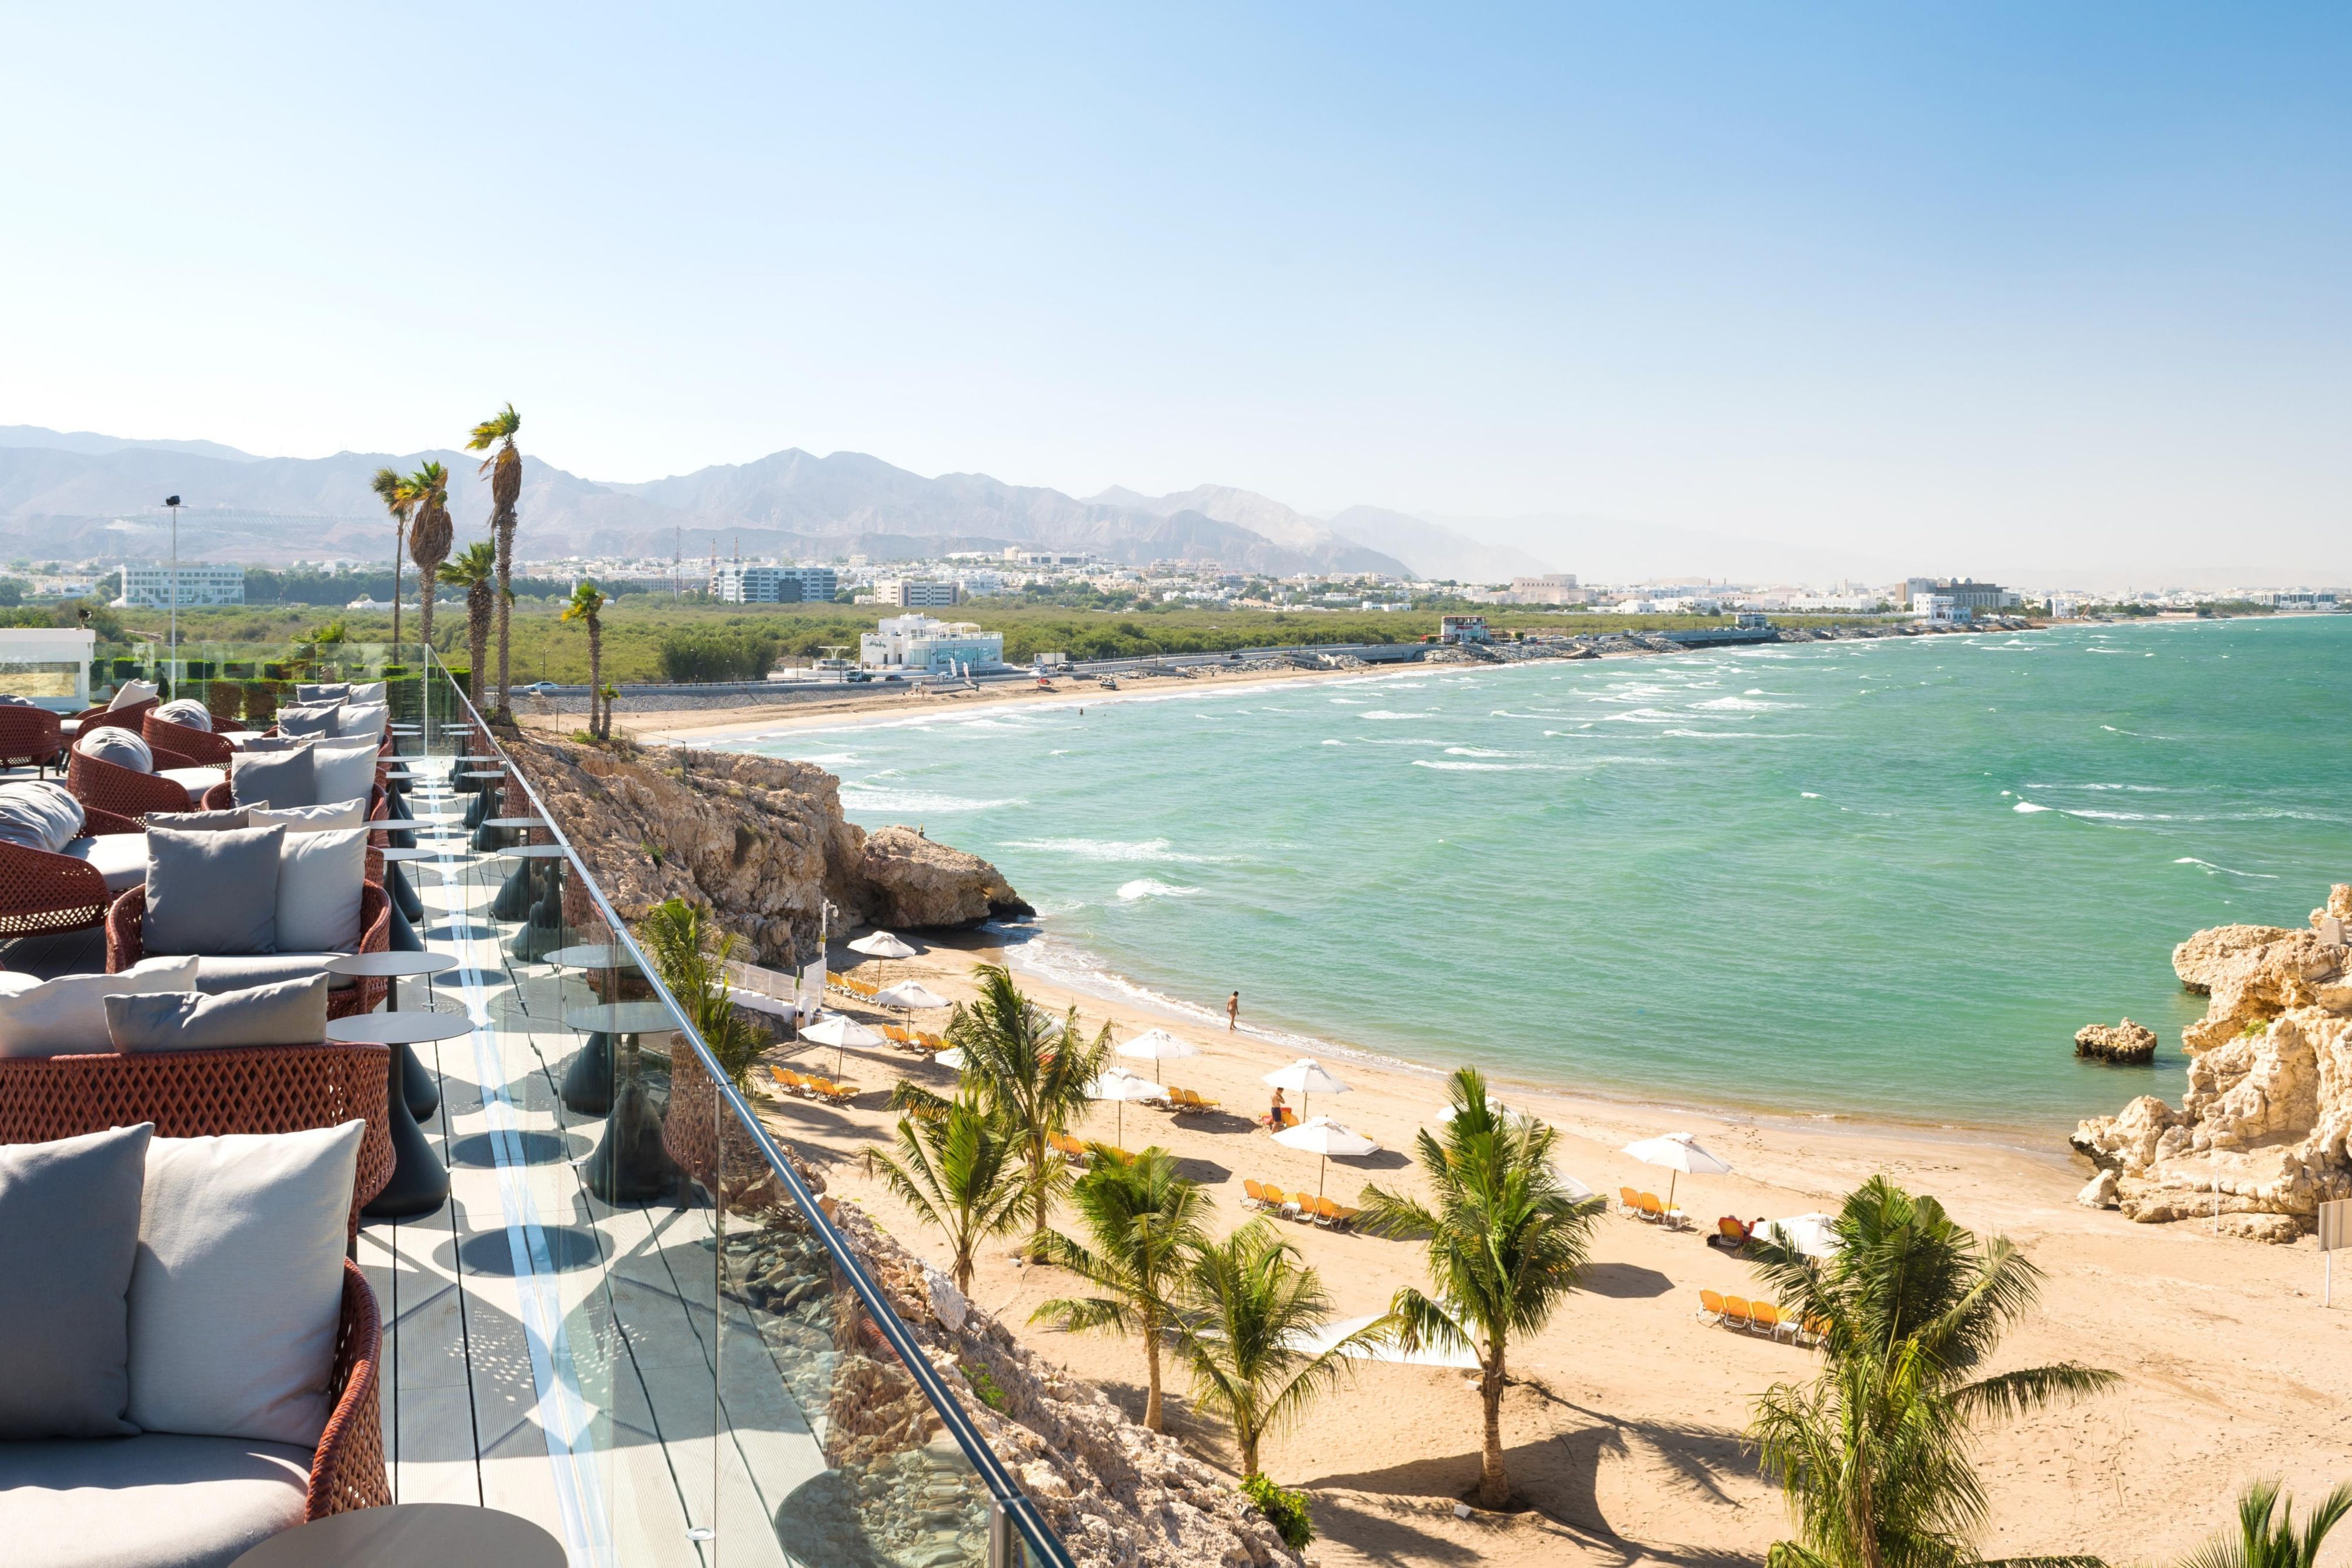 Views of the private beach and corniche from The Edge Restaurant